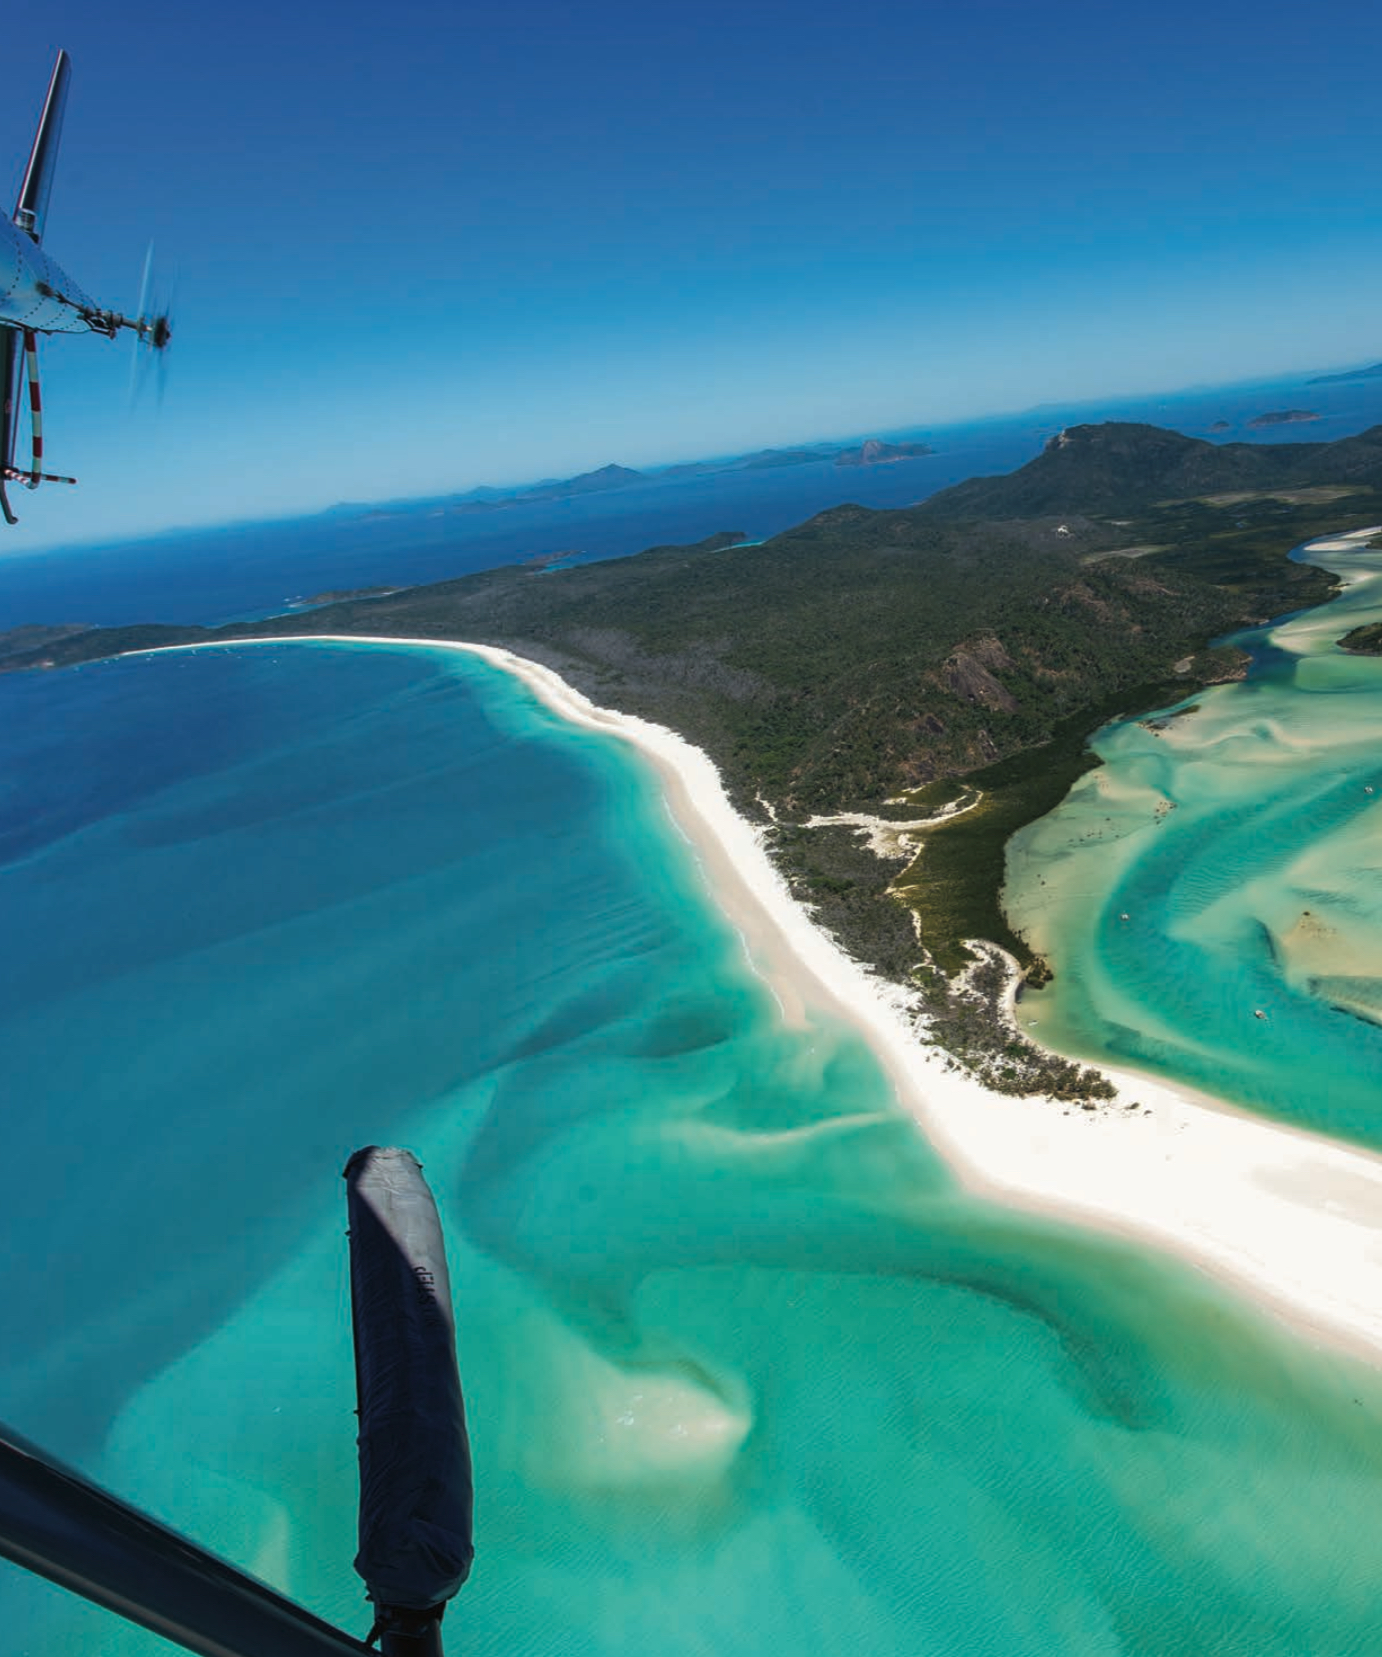 A helicopter tour of the island